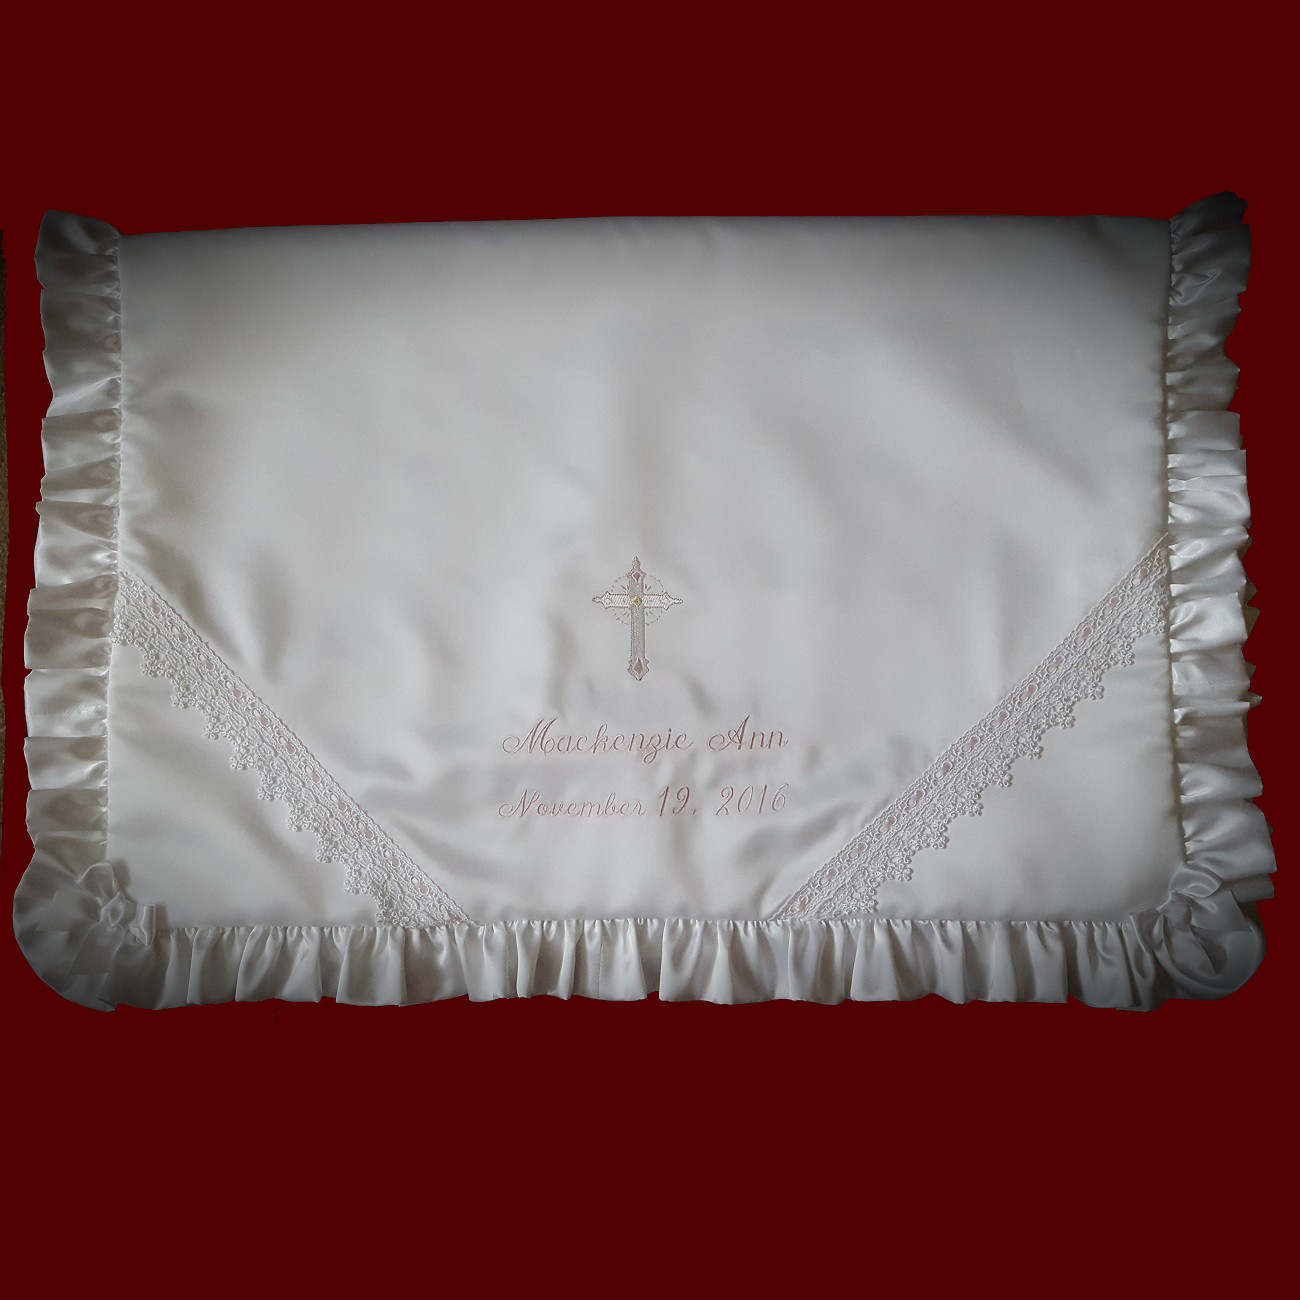 Girls Embroidered Cross & Lace Christening Blanket